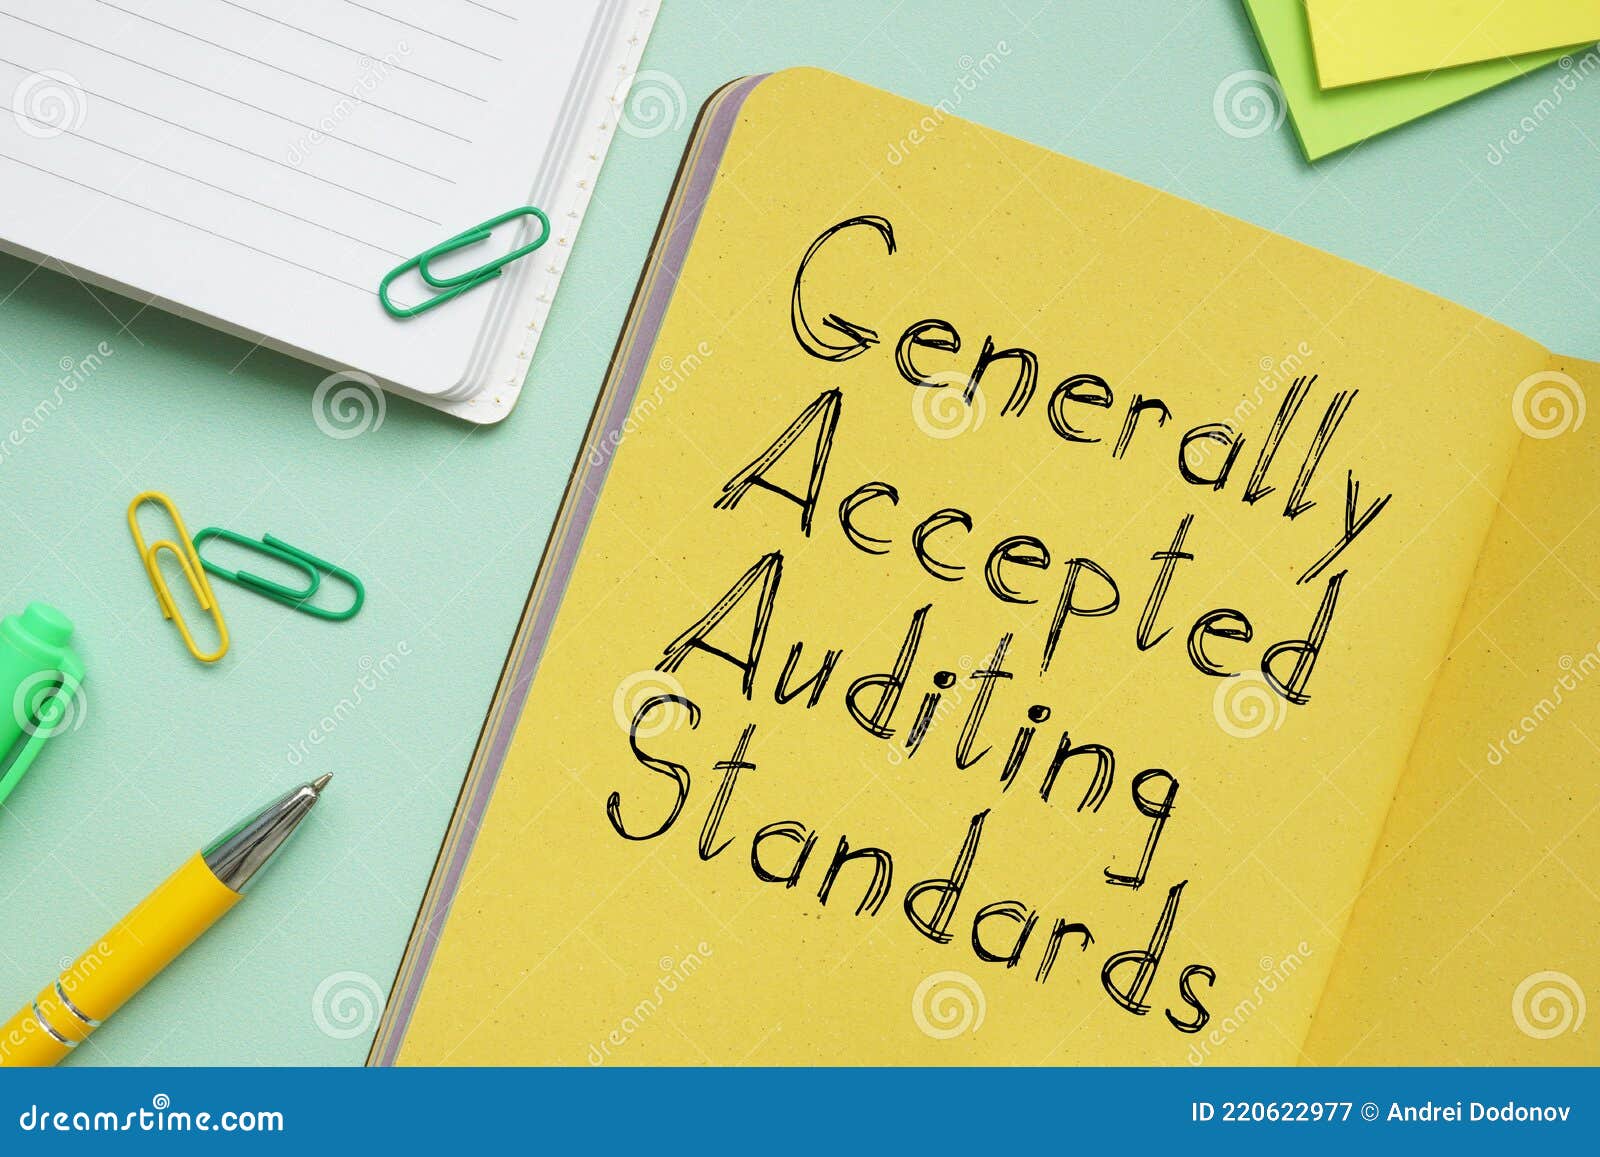 generally accepted auditing principles